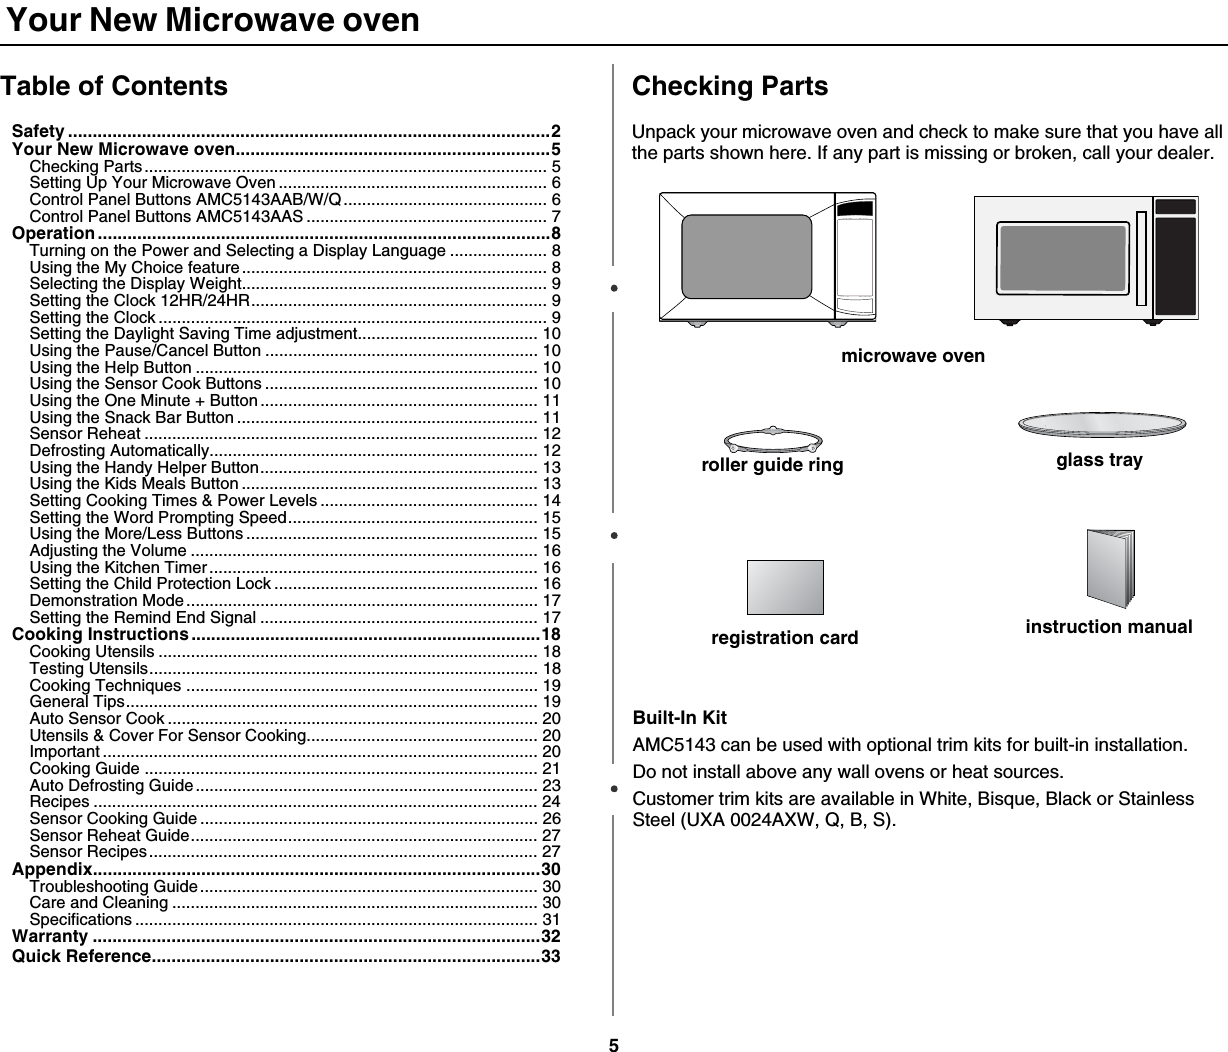 5 Your New Microwave ovenTable of ContentsSafety ..................................................................................................2Your New Microwave oven................................................................5Checking Parts....................................................................................... 5Setting Up Your Microwave Oven .......................................................... 6Control Panel Buttons AMC5143AAB/W/Q............................................ 6Control Panel Buttons AMC5143AAS .................................................... 7Operation ............................................................................................8Turning on the Power and Selecting a Display Language ..................... 8Using the My Choice feature.................................................................. 8Selecting the Display Weight.................................................................. 9Setting the Clock 12HR/24HR................................................................ 9Setting the Clock .................................................................................... 9Setting the Daylight Saving Time adjustment....................................... 10Using the Pause/Cancel Button ........................................................... 10Using the Help Button .......................................................................... 10Using the Sensor Cook Buttons ........................................................... 10Using the One Minute + Button............................................................ 11Using the Snack Bar Button ................................................................. 11Sensor Reheat ..................................................................................... 12Defrosting Automatically....................................................................... 12Using the Handy Helper Button............................................................ 13Using the Kids Meals Button ................................................................ 13Setting Cooking Times &amp; Power Levels ............................................... 14Setting the Word Prompting Speed...................................................... 15Using the More/Less Buttons ............................................................... 15Adjusting the Volume ........................................................................... 16Using the Kitchen Timer ....................................................................... 16Setting the Child Protection Lock ......................................................... 16Demonstration Mode............................................................................ 17Setting the Remind End Signal ............................................................ 17Cooking Instructions.......................................................................18Cooking Utensils .................................................................................. 18Testing Utensils.................................................................................... 18Cooking Techniques ............................................................................ 19General Tips......................................................................................... 19Auto Sensor Cook ................................................................................ 20Utensils &amp; Cover For Sensor Cooking.................................................. 20Important .............................................................................................. 20Cooking Guide ..................................................................................... 21Auto Defrosting Guide .......................................................................... 23Recipes ................................................................................................ 24Sensor Cooking Guide ......................................................................... 26Sensor Reheat Guide........................................................................... 27Sensor Recipes.................................................................................... 27Appendix...........................................................................................30Troubleshooting Guide......................................................................... 30Care and Cleaning ............................................................................... 30Specifications ....................................................................................... 31Warranty ...........................................................................................32Quick Reference...............................................................................33Checking PartsUnpack your microwave oven and check to make sure that you have all the parts shown here. If any part is missing or broken, call your dealer.microwave ovenglass trayroller guide ringinstruction manualregistration card   Built-In KitAMC5143 can be used with optional trim kits for built-in installation. Do not install above any wall ovens or heat sources.Customer trim kits are available in White, Bisque, Black or Stainless Steel (UXA 0024AXW, Q, B, S).